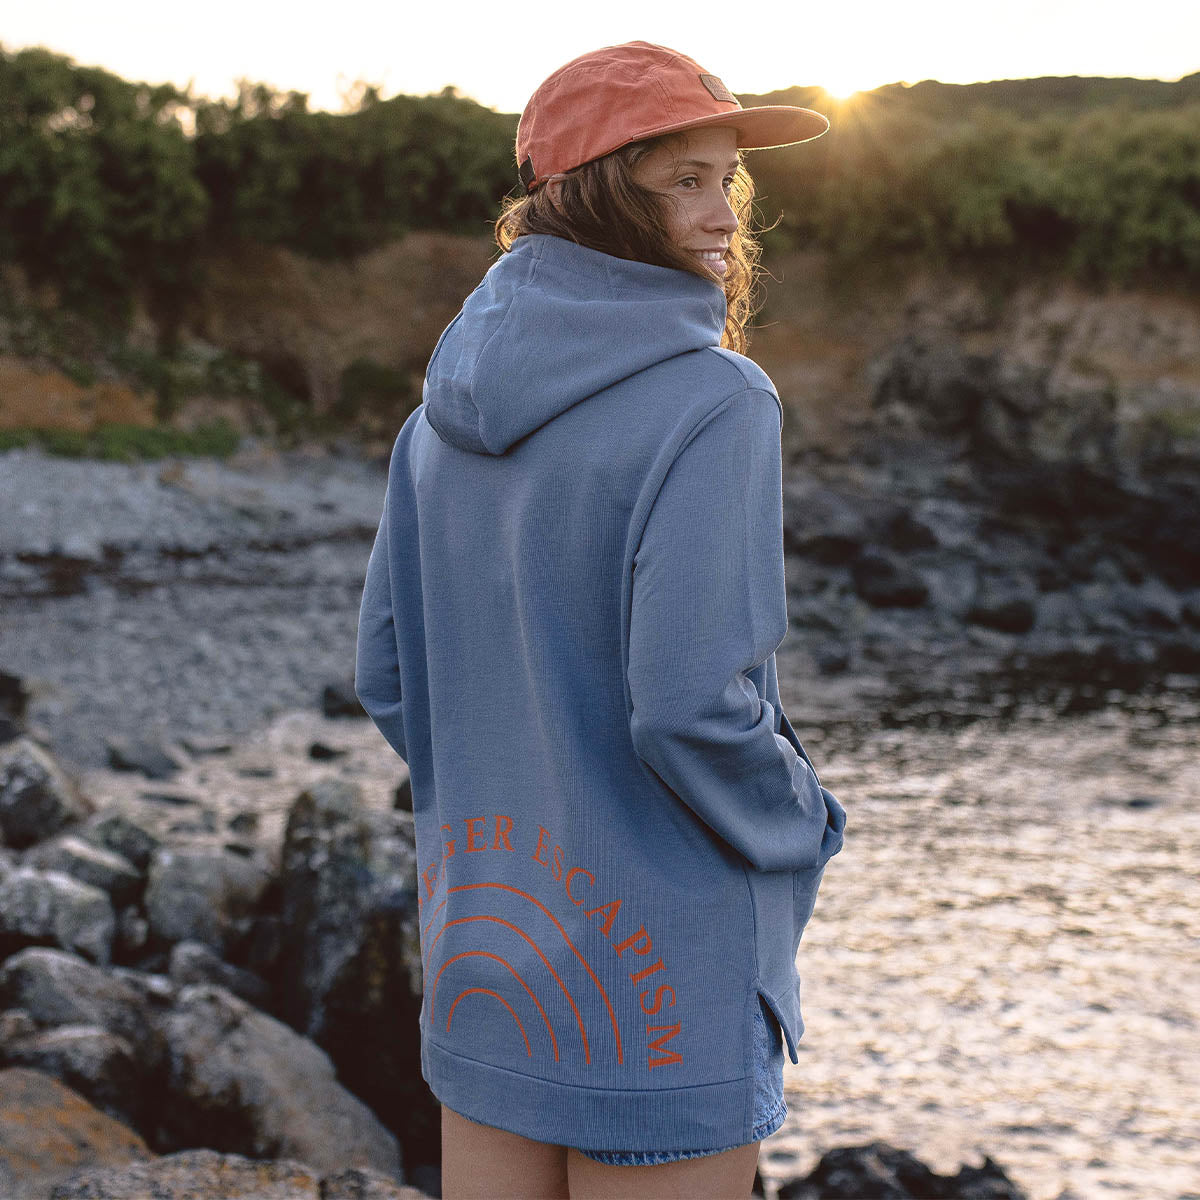 Rainbow Recycled Cotton Hoodie - Stone Blue